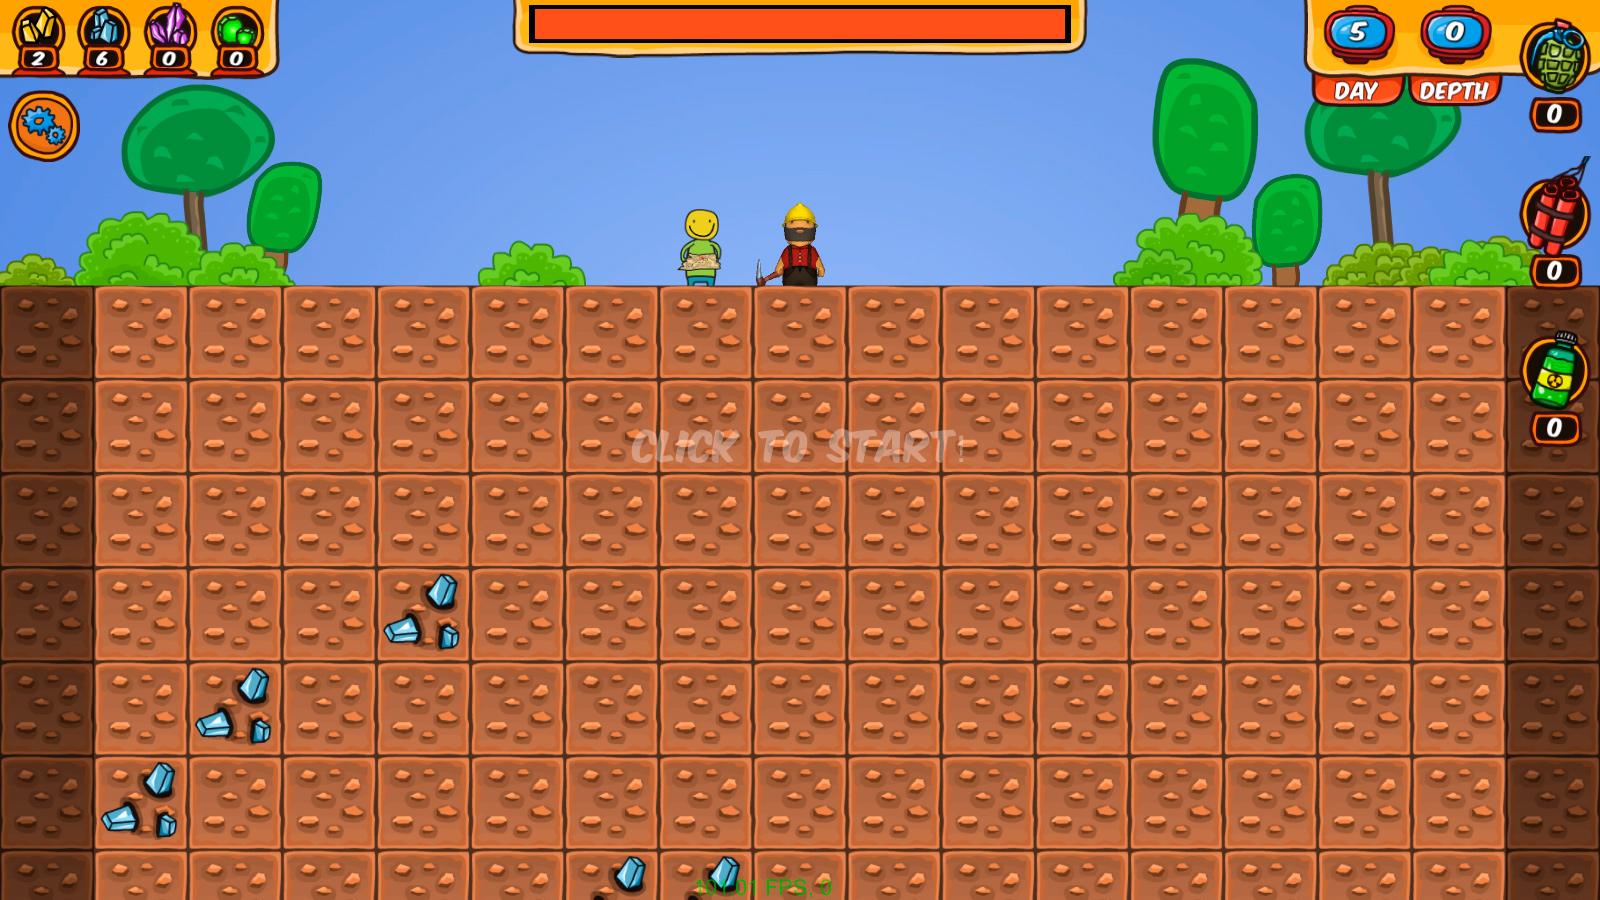 Screenshot №1 from game Mad Digger